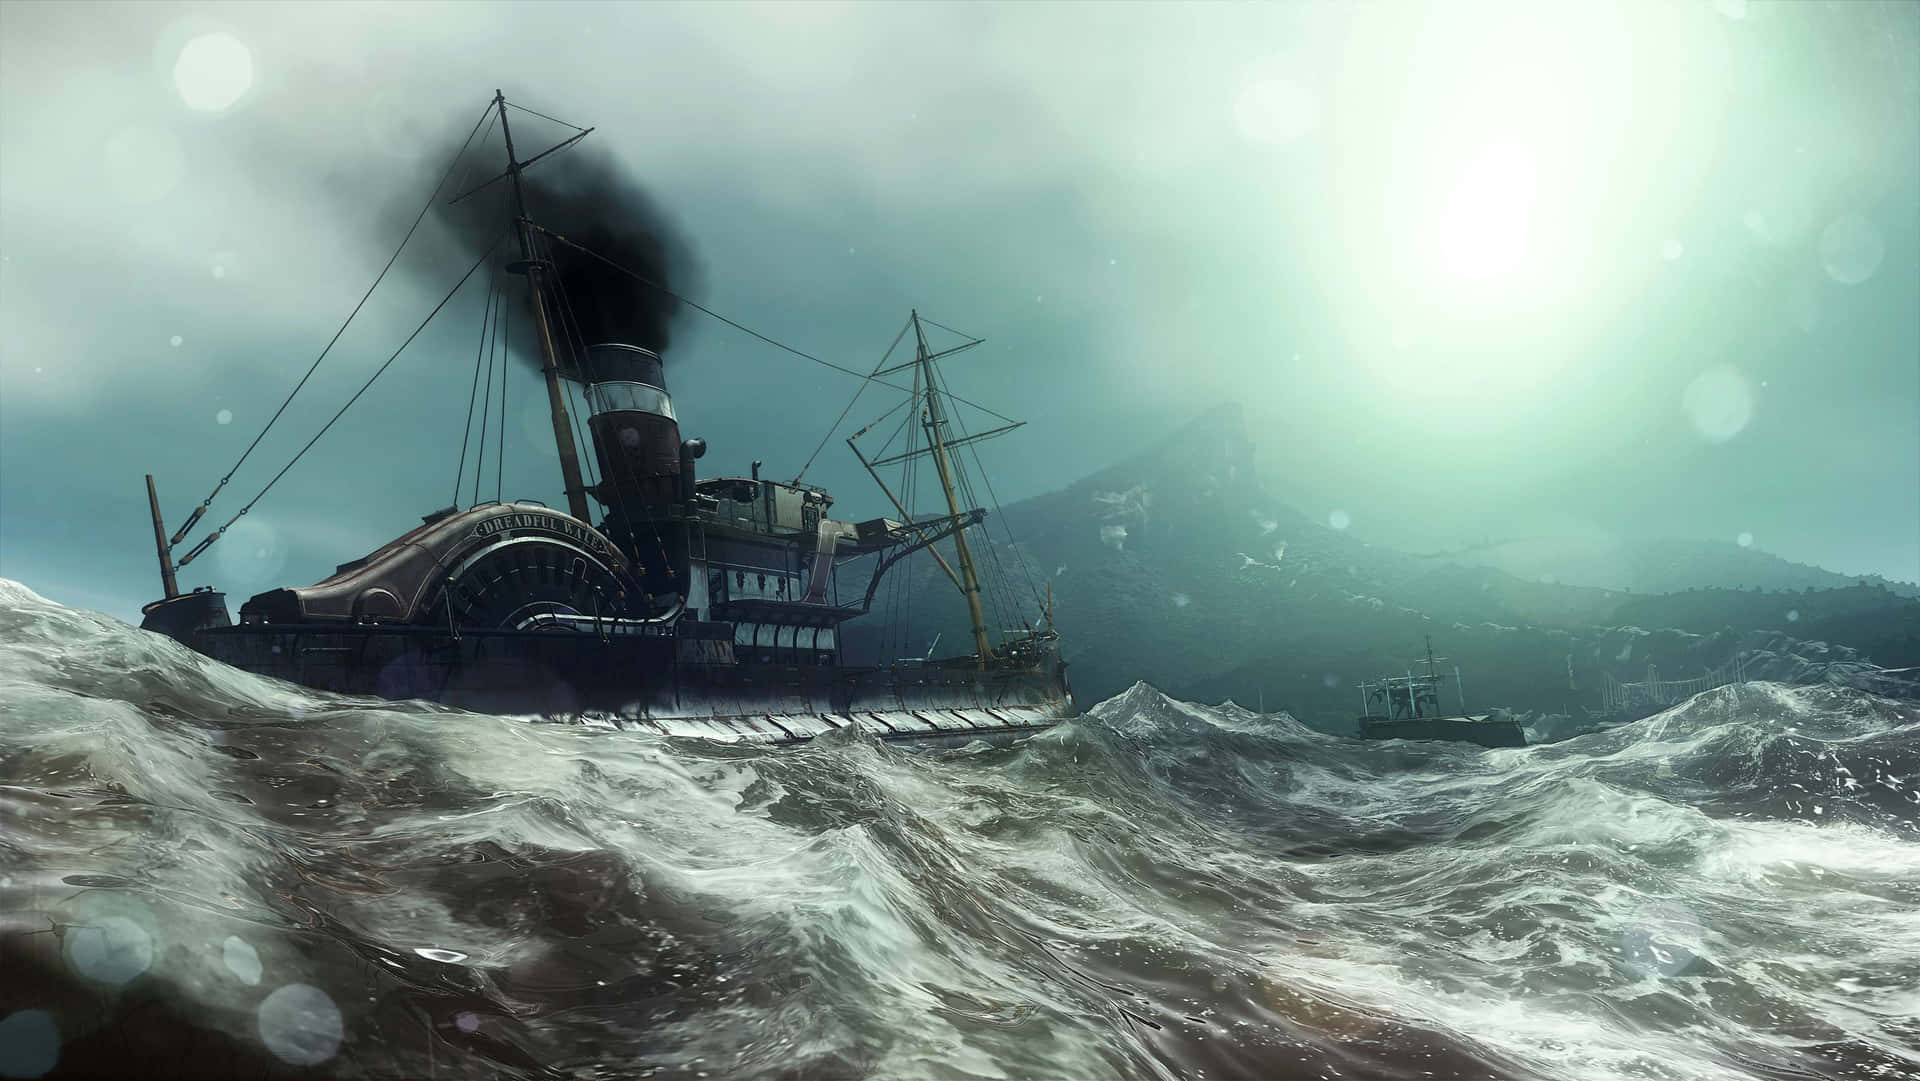 A Ship Is In The Middle Of A Stormy Sea